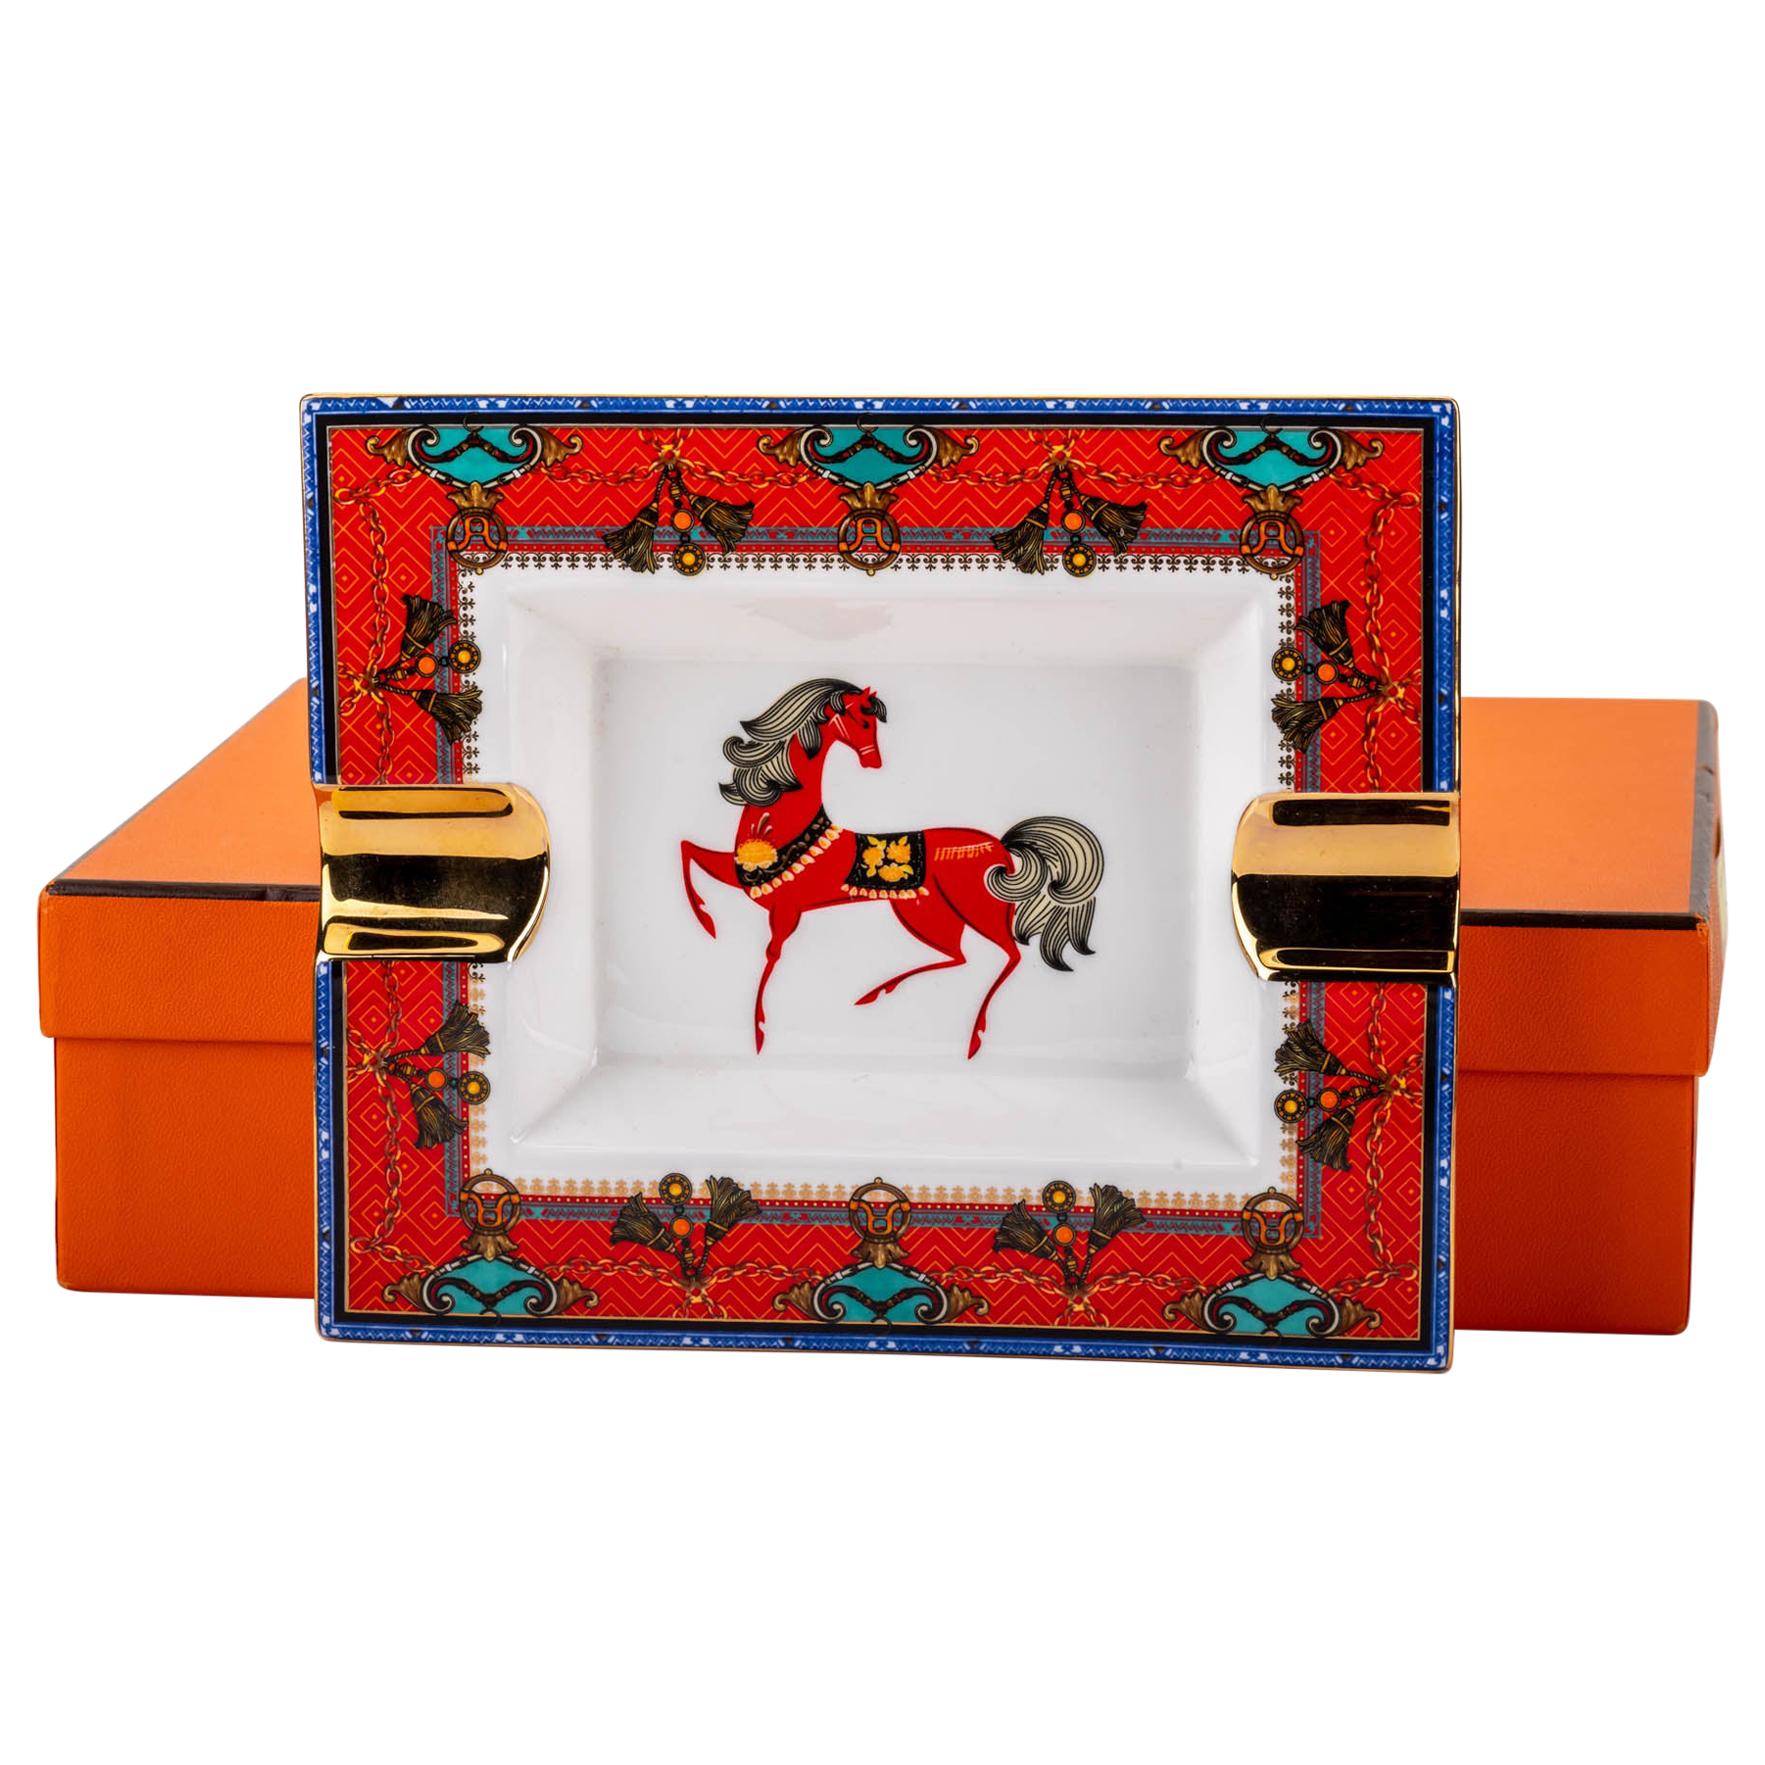 Hermes Red Horse Porcelain Ashtray with Box